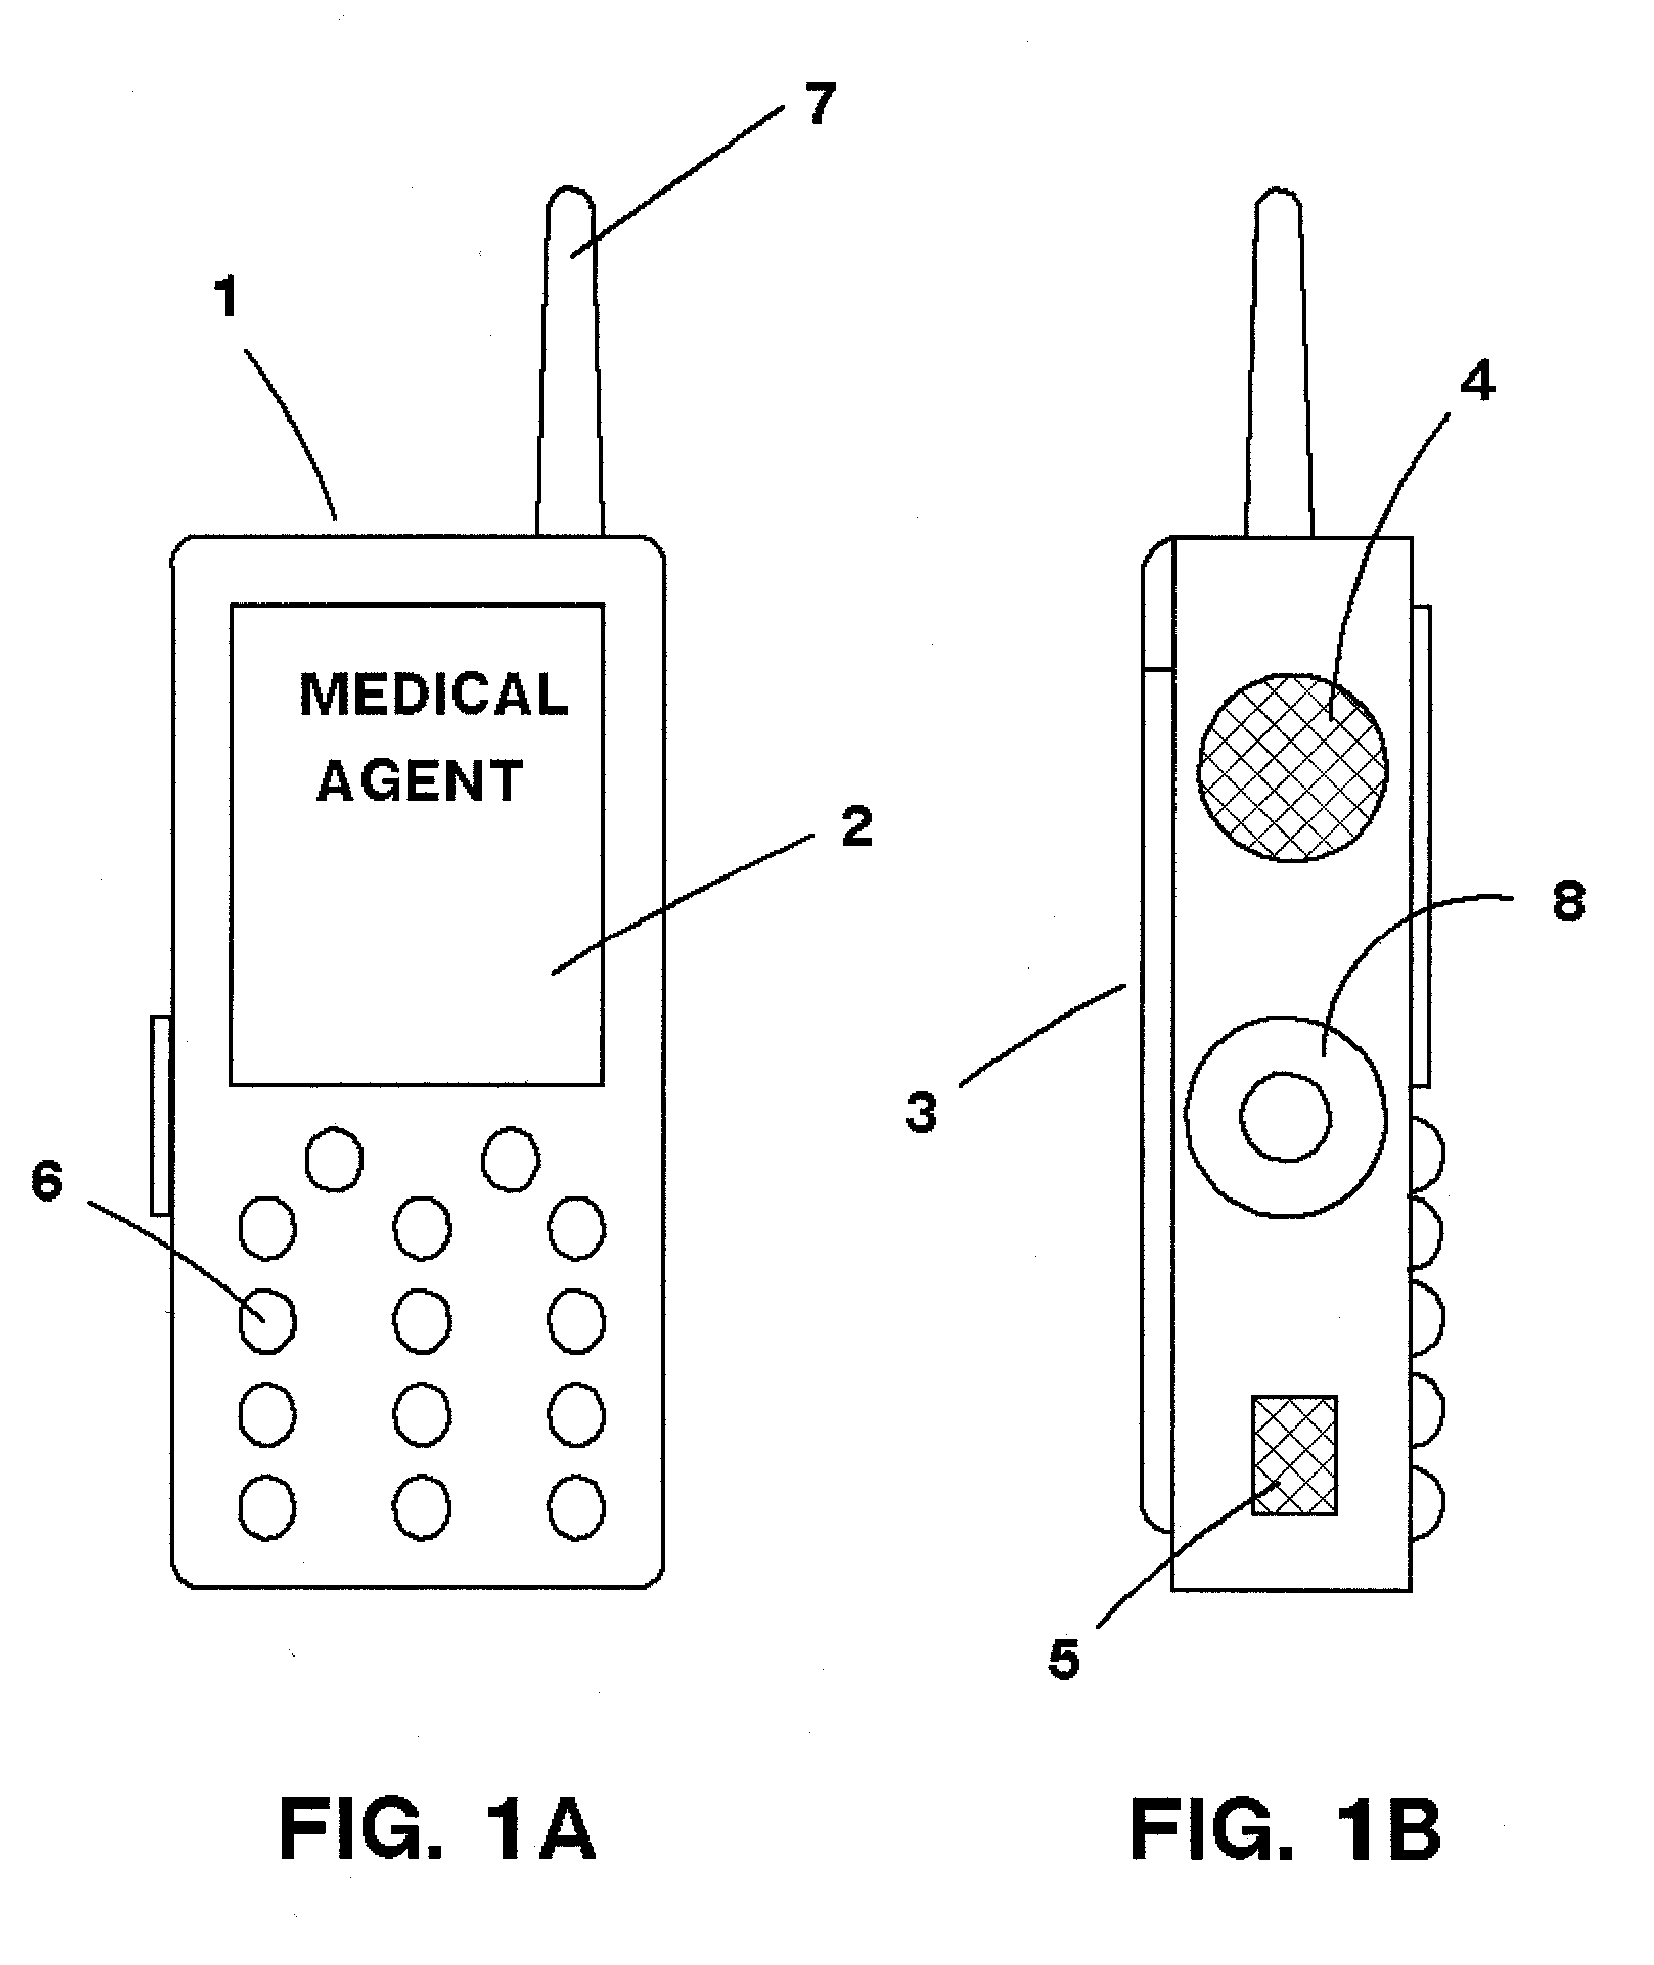 Emergency Medical Diagnosis and Communications Device